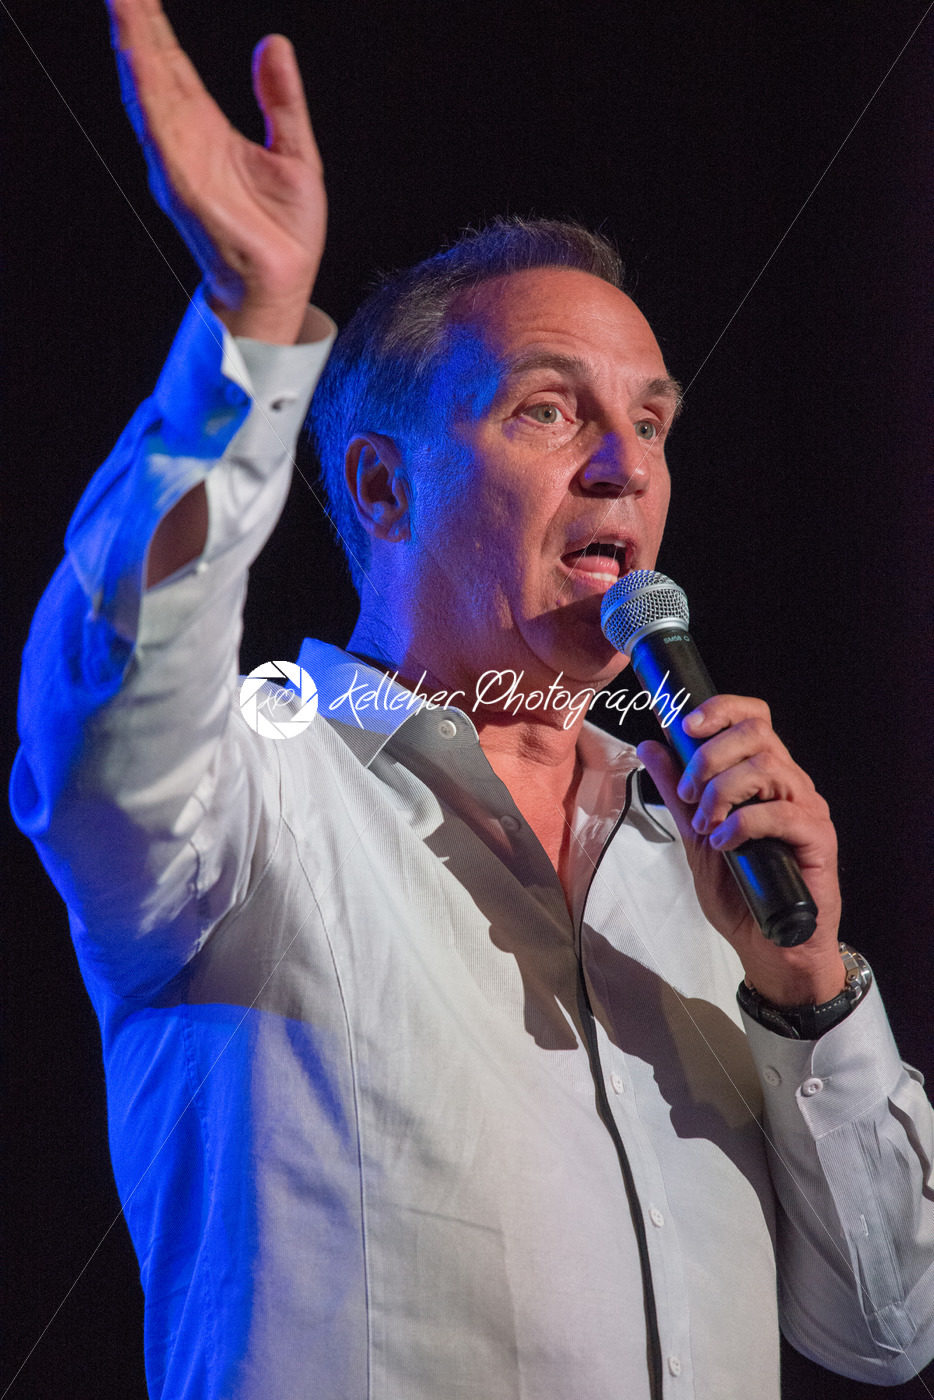 VALLEY FORGE CASINO, KING OF PRUSSIA, PA – JULY 15: Comedian Craig Shoemaker performing at Kendall’s Crusade fundraising event to raise awareness of Arteriovenus Malformations AVM on July 15, 2017 - Kelleher Photography Store